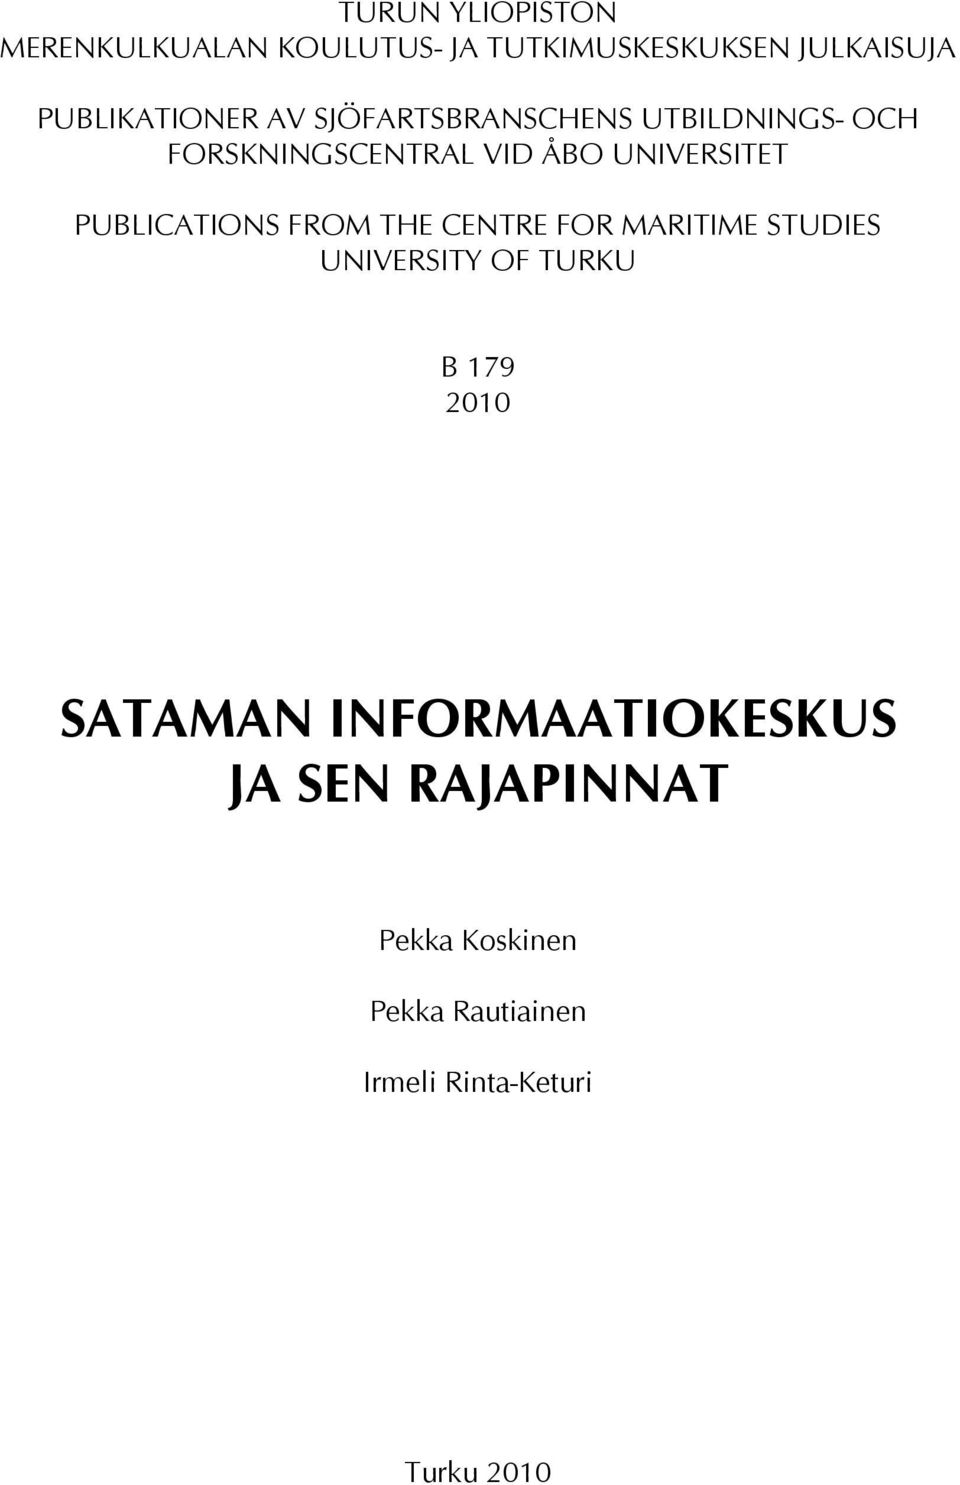 PUBLICATIONS FROM THE CENTRE FOR MARITIME STUDIES UNIVERSITY OF TURKU B 179 2010